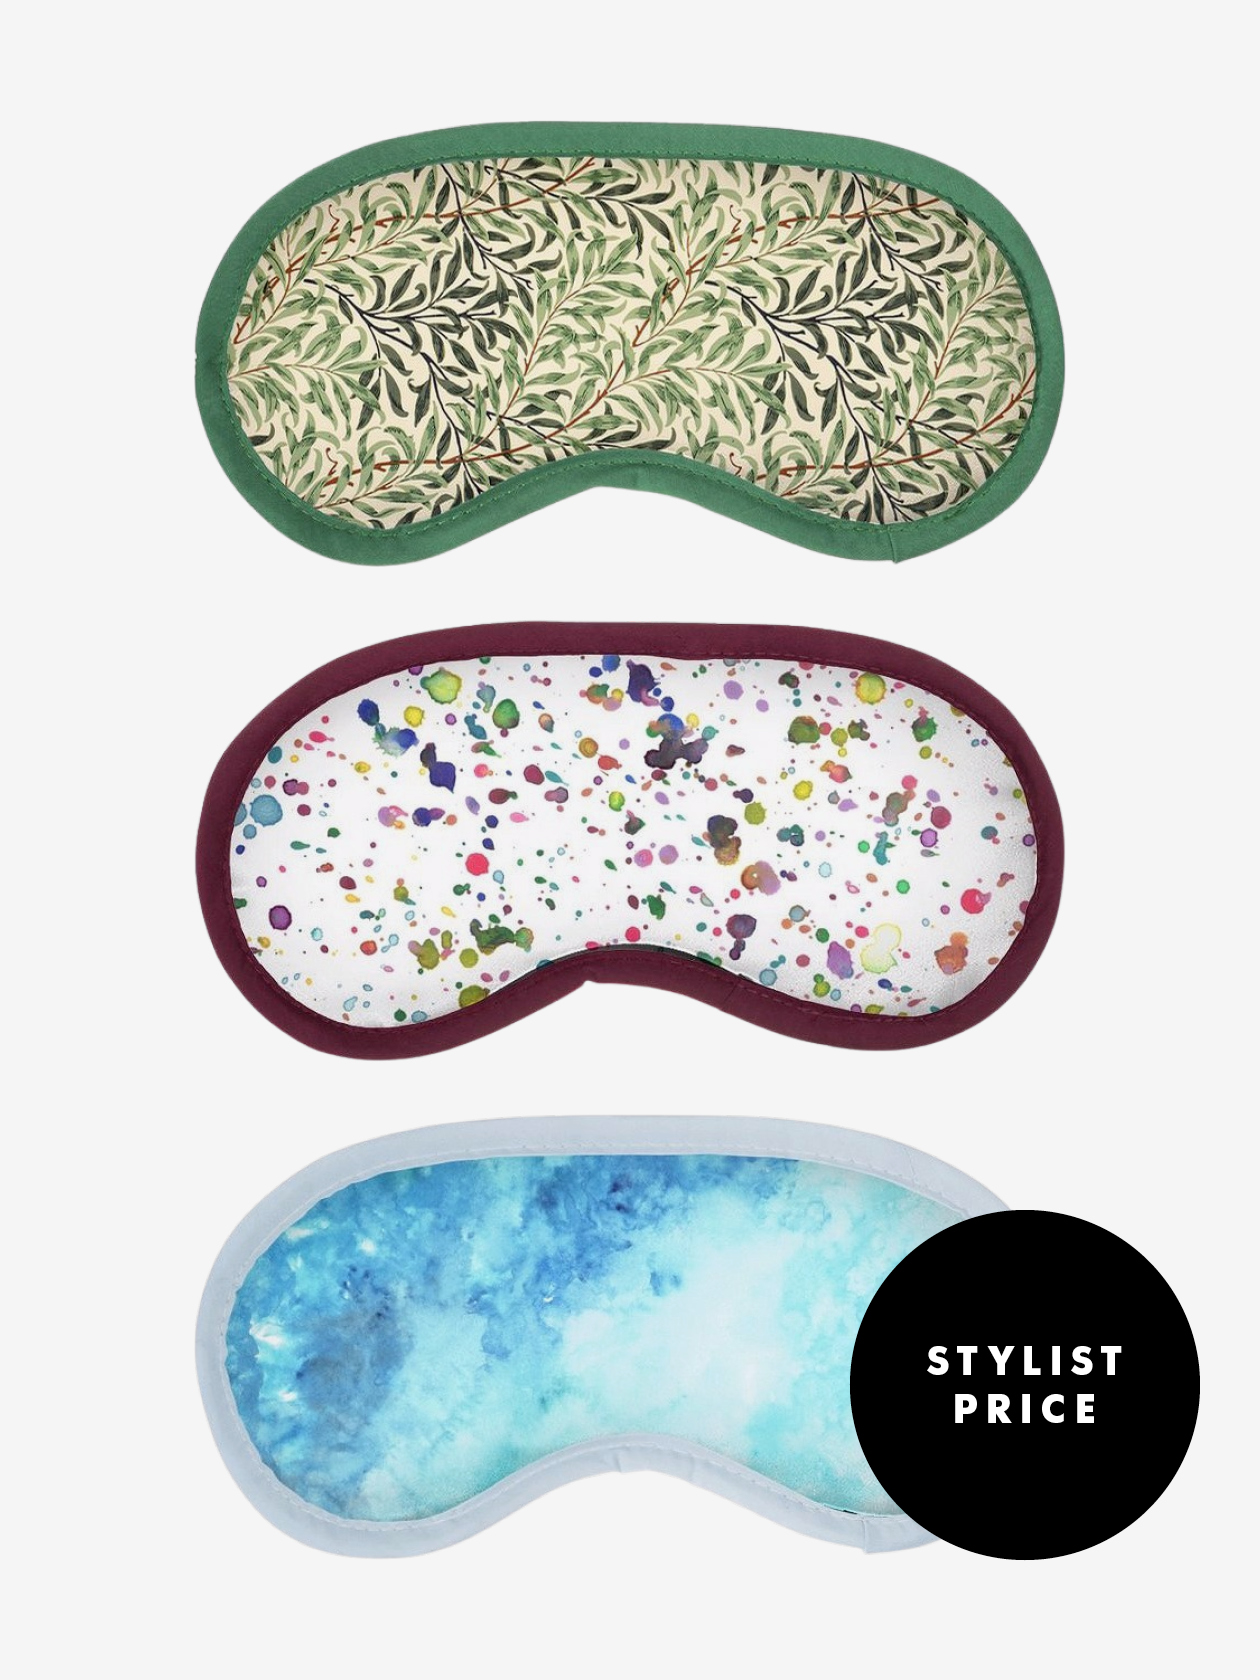 Best luxury eye masks for sleep and travel, from Gucci, Chanel and more